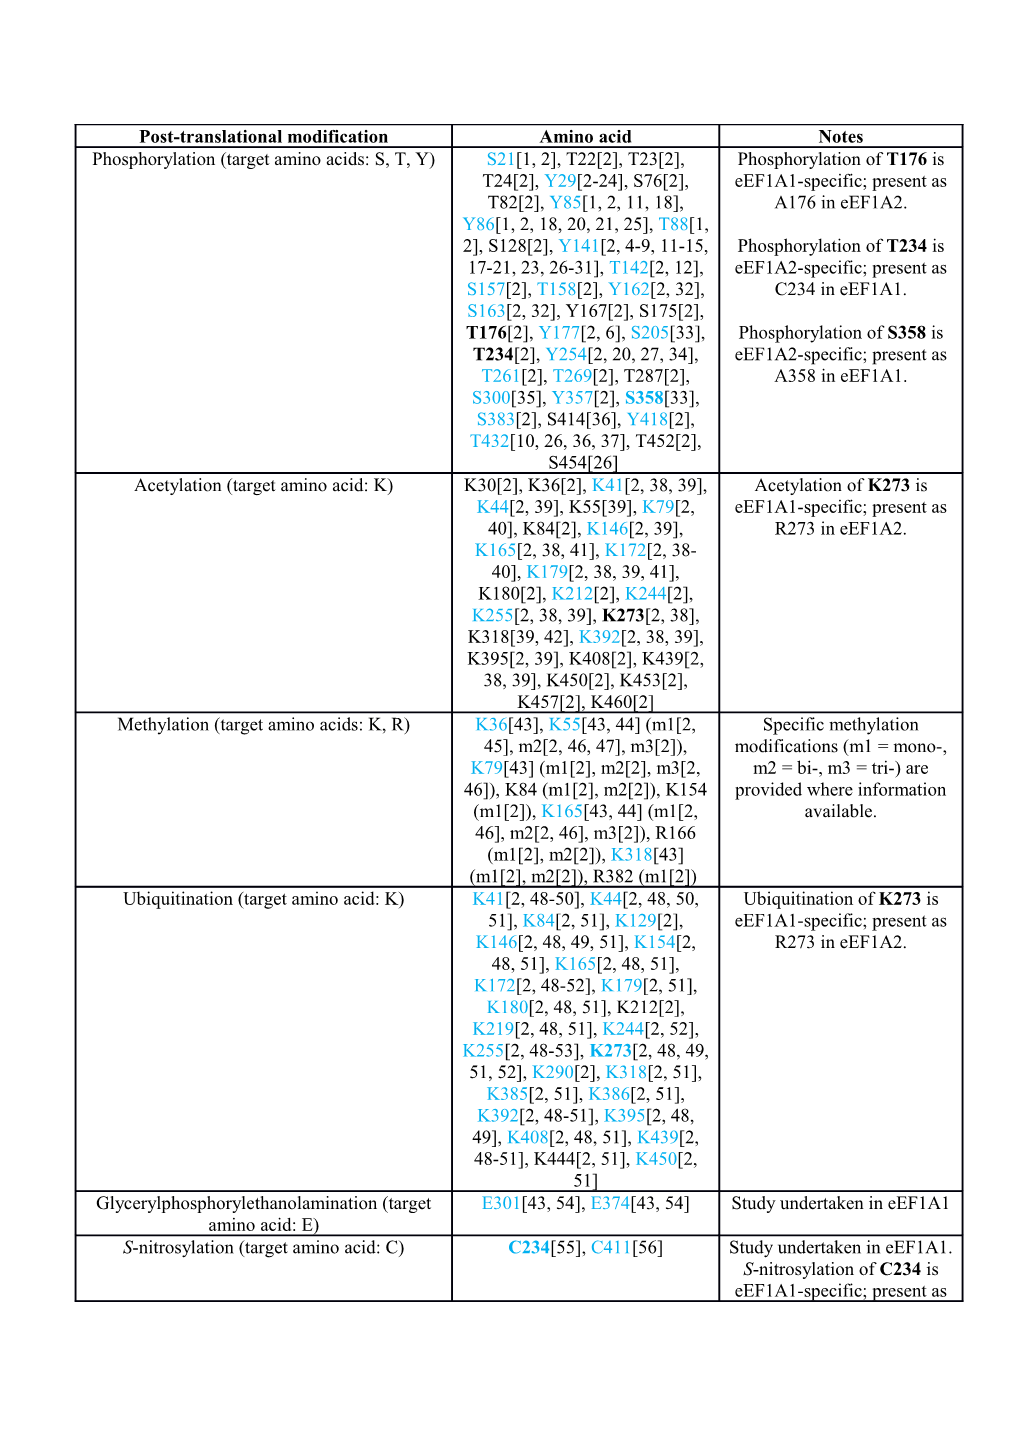 Additional File 2: Table of Post-Translational Modifications (Ptms) in Eef1a1 and Eef1a2